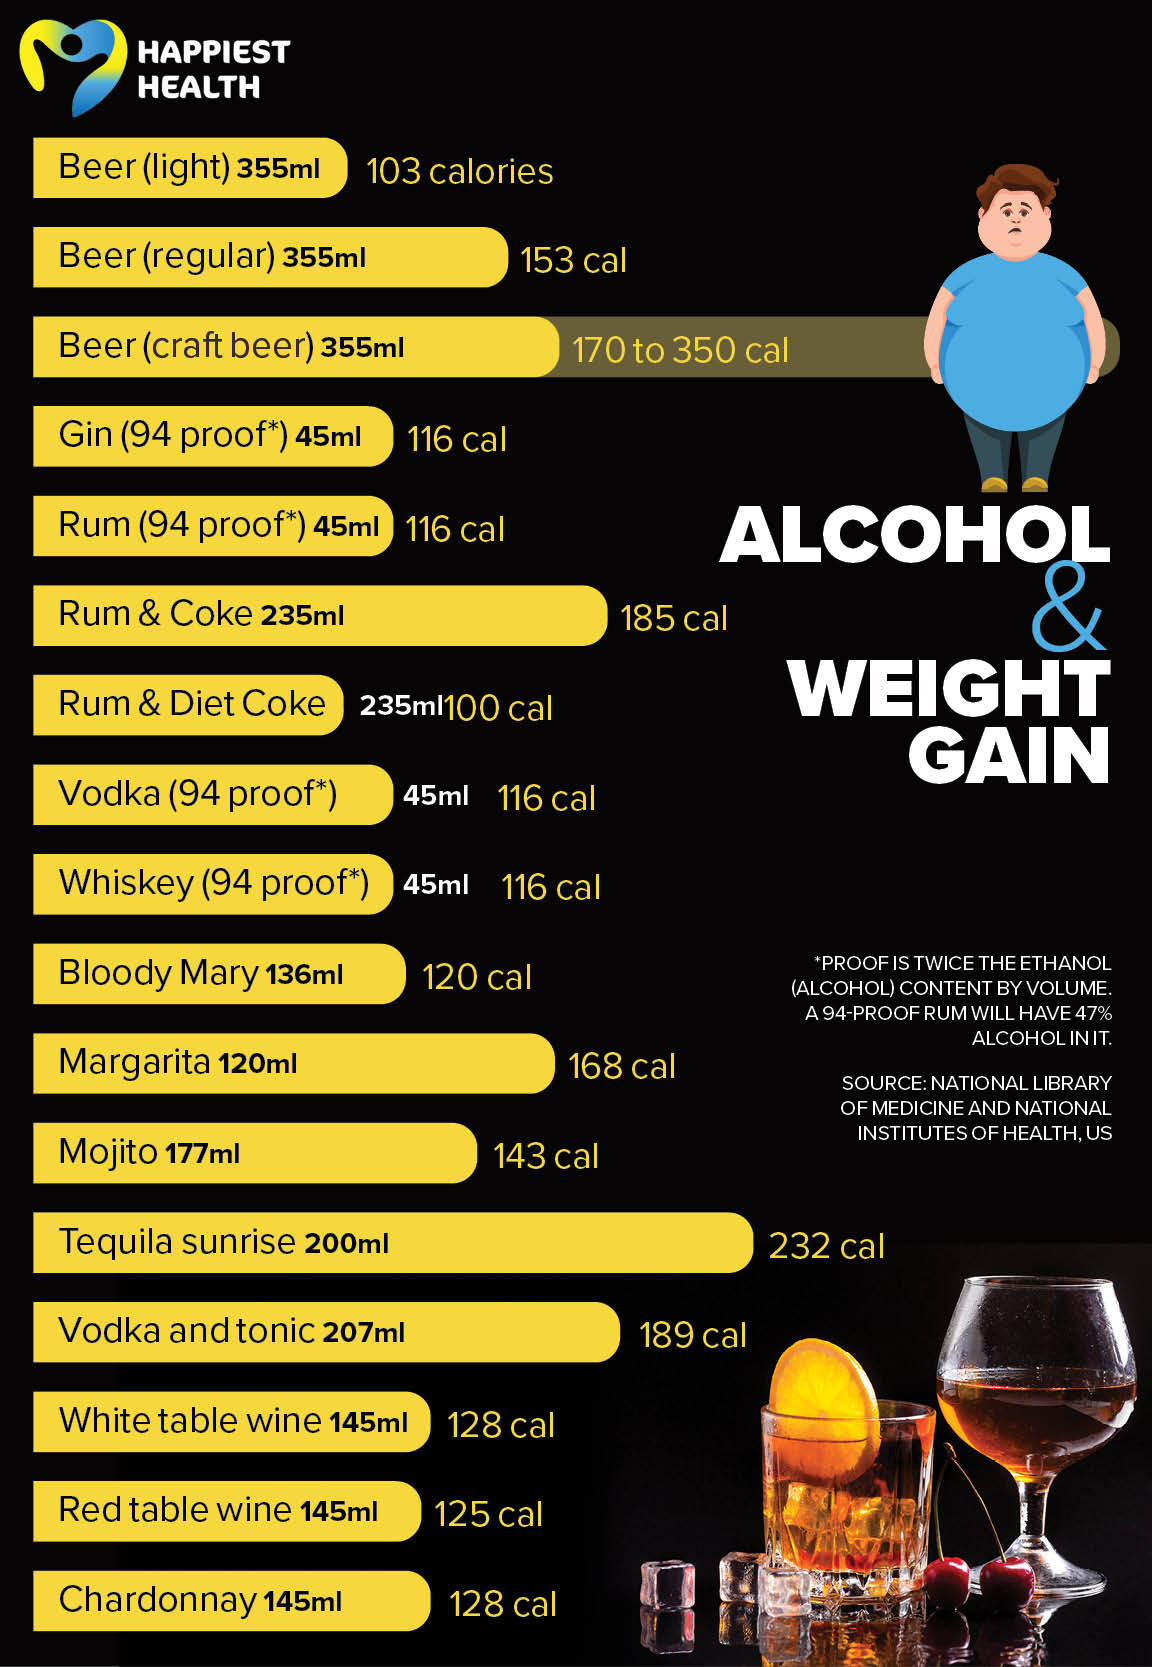 Alcohol and weight gain